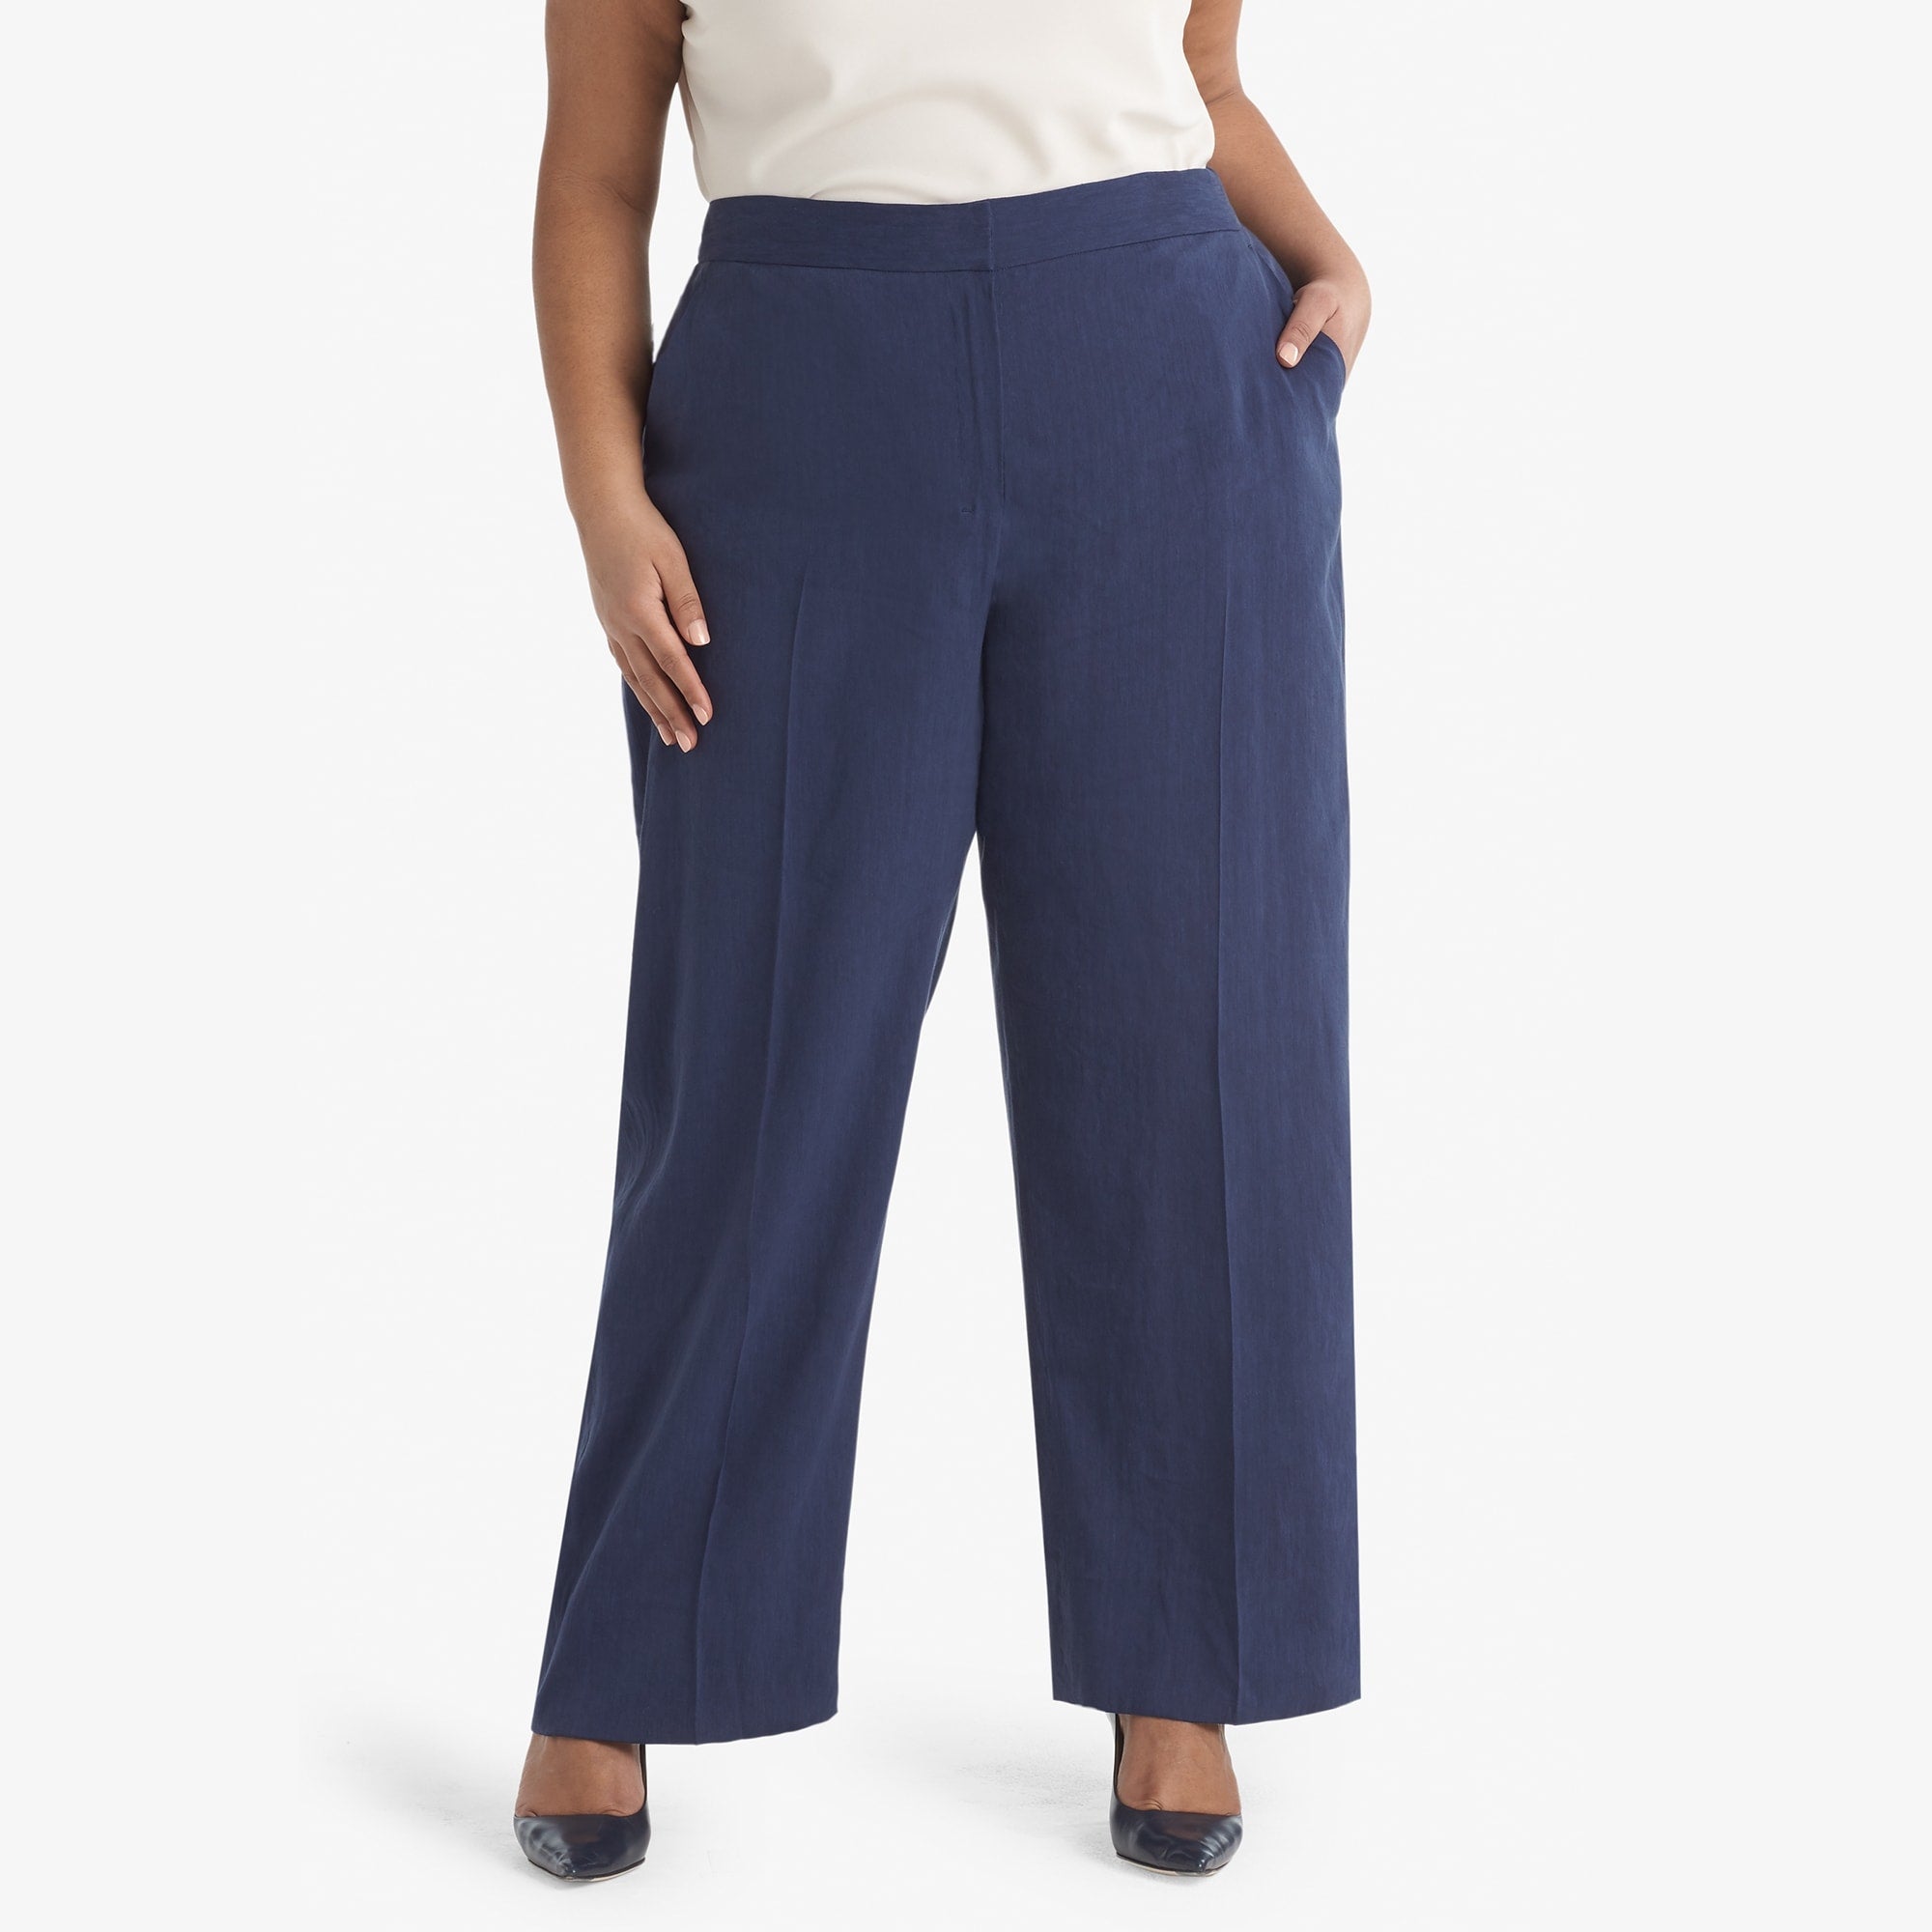 Front image of a woman standing wearing the Tinsley trouser stretch linen in blueberry 